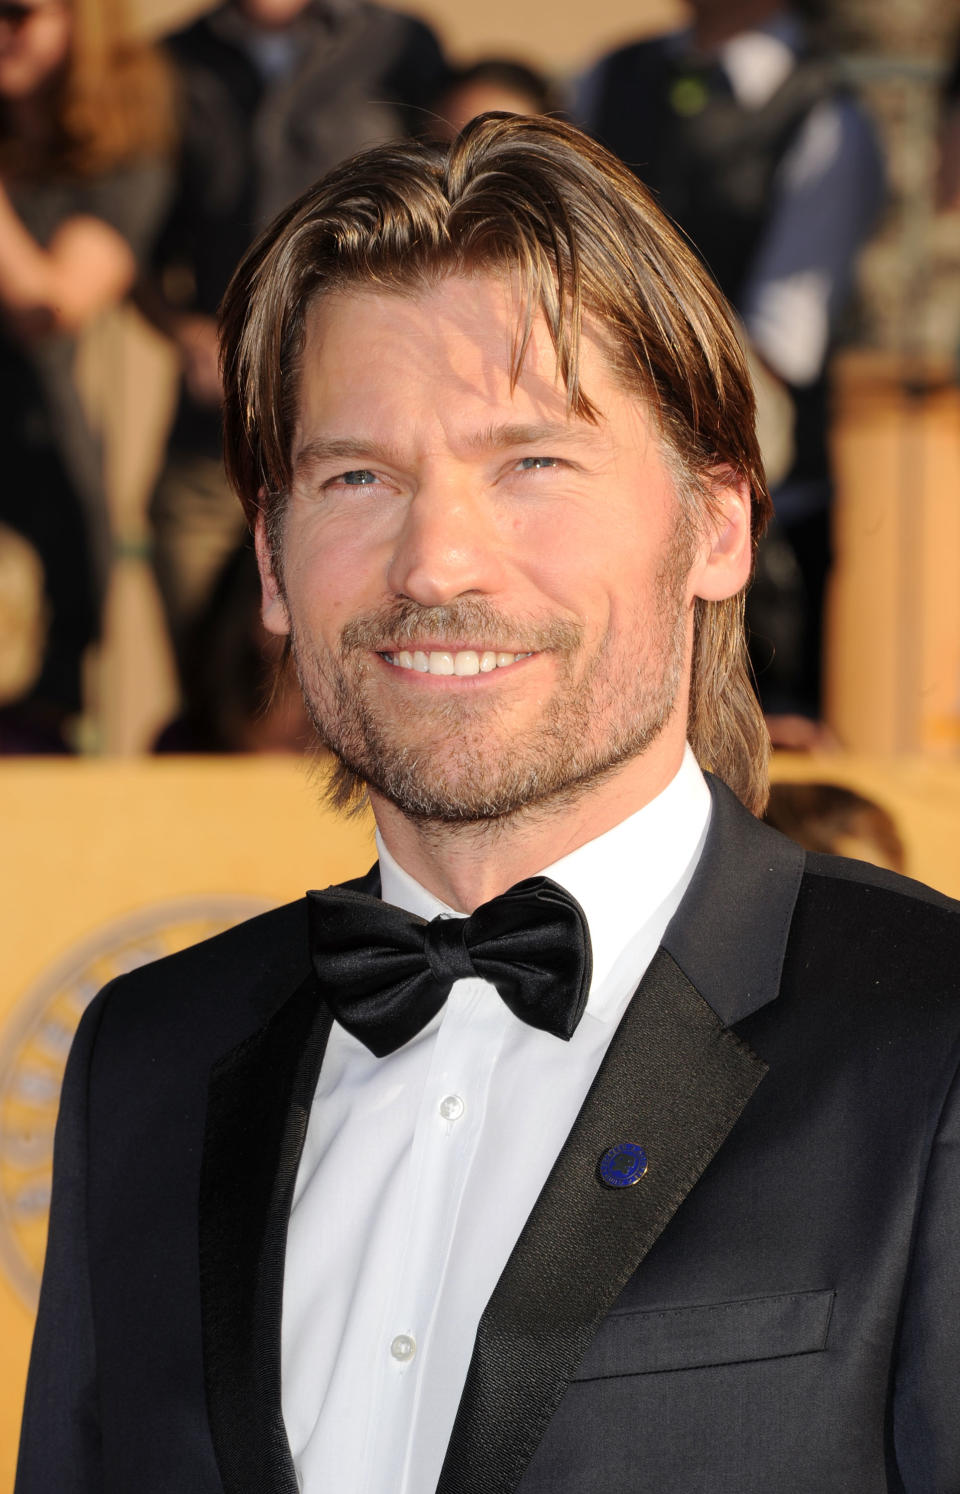 LOS ANGELES, CA - JANUARY 29: Actor Nikolaj Coster-Waldau arrives at the 18th Annual Screen Actors Guild Awards at The Shrine Auditorium on January 29, 2012 in Los Angeles, California. (Photo by Jason Merritt/Getty Images)